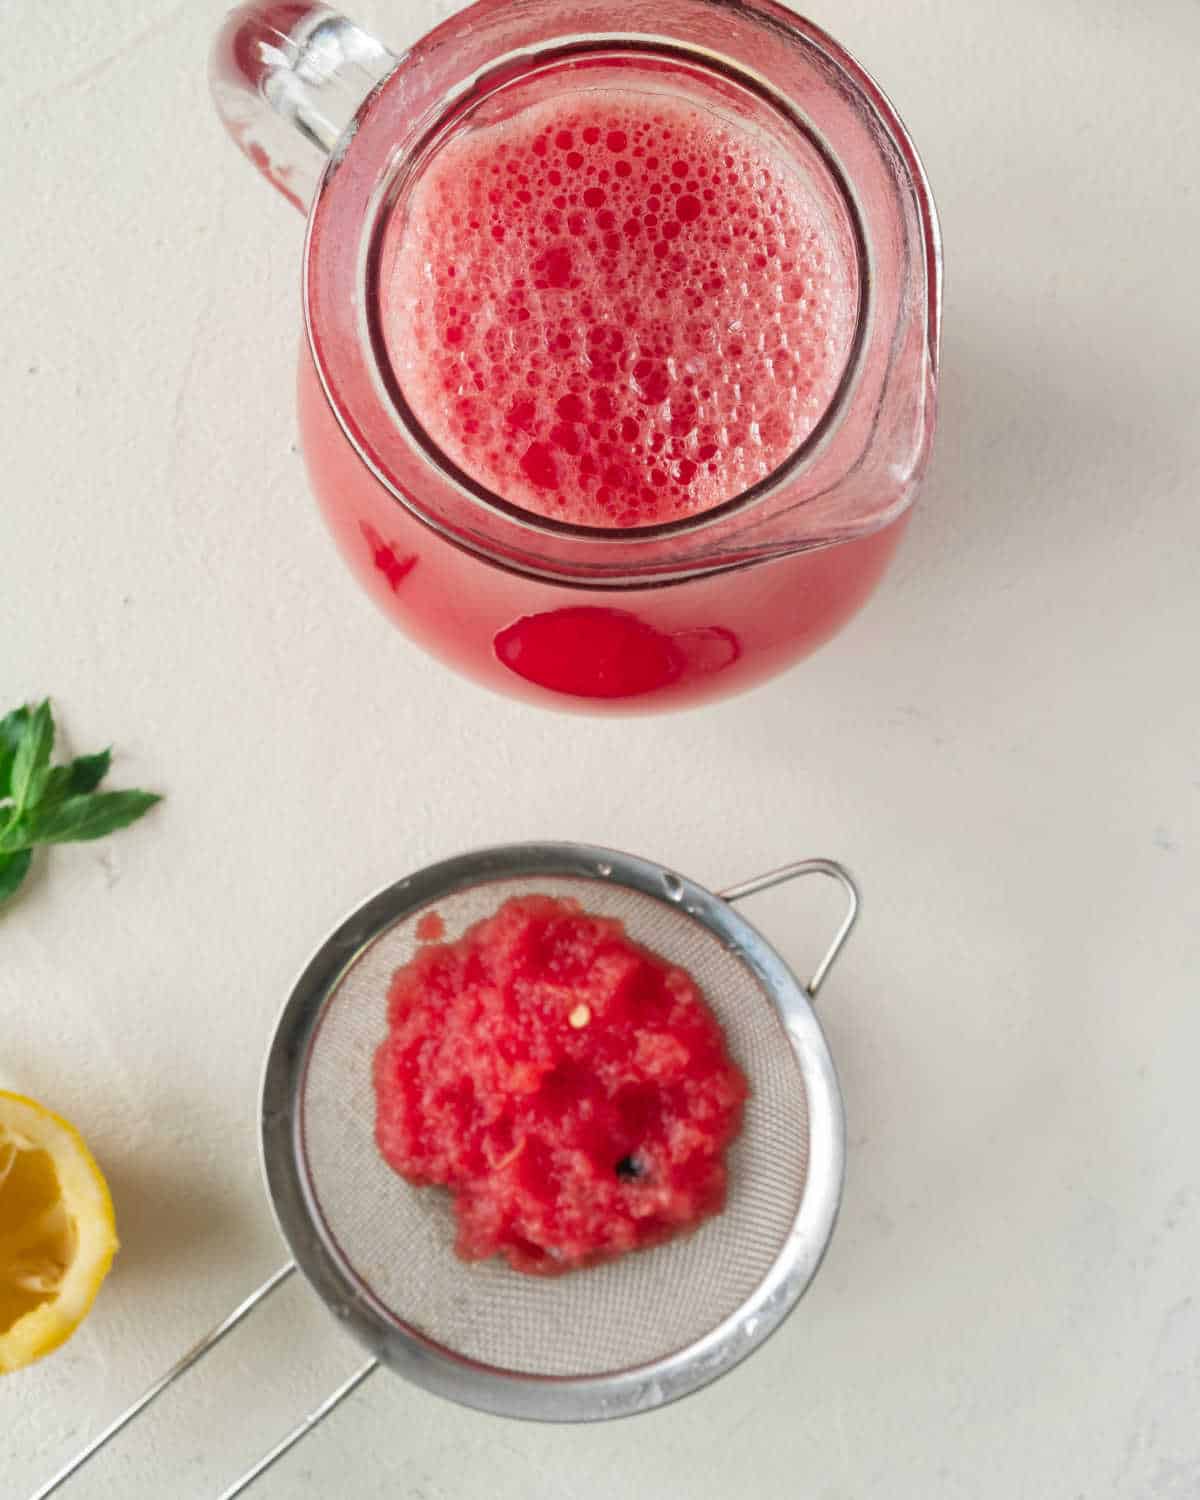 Top view of small jug with watermelon syrup and sieve with pulp. Off-white surface.